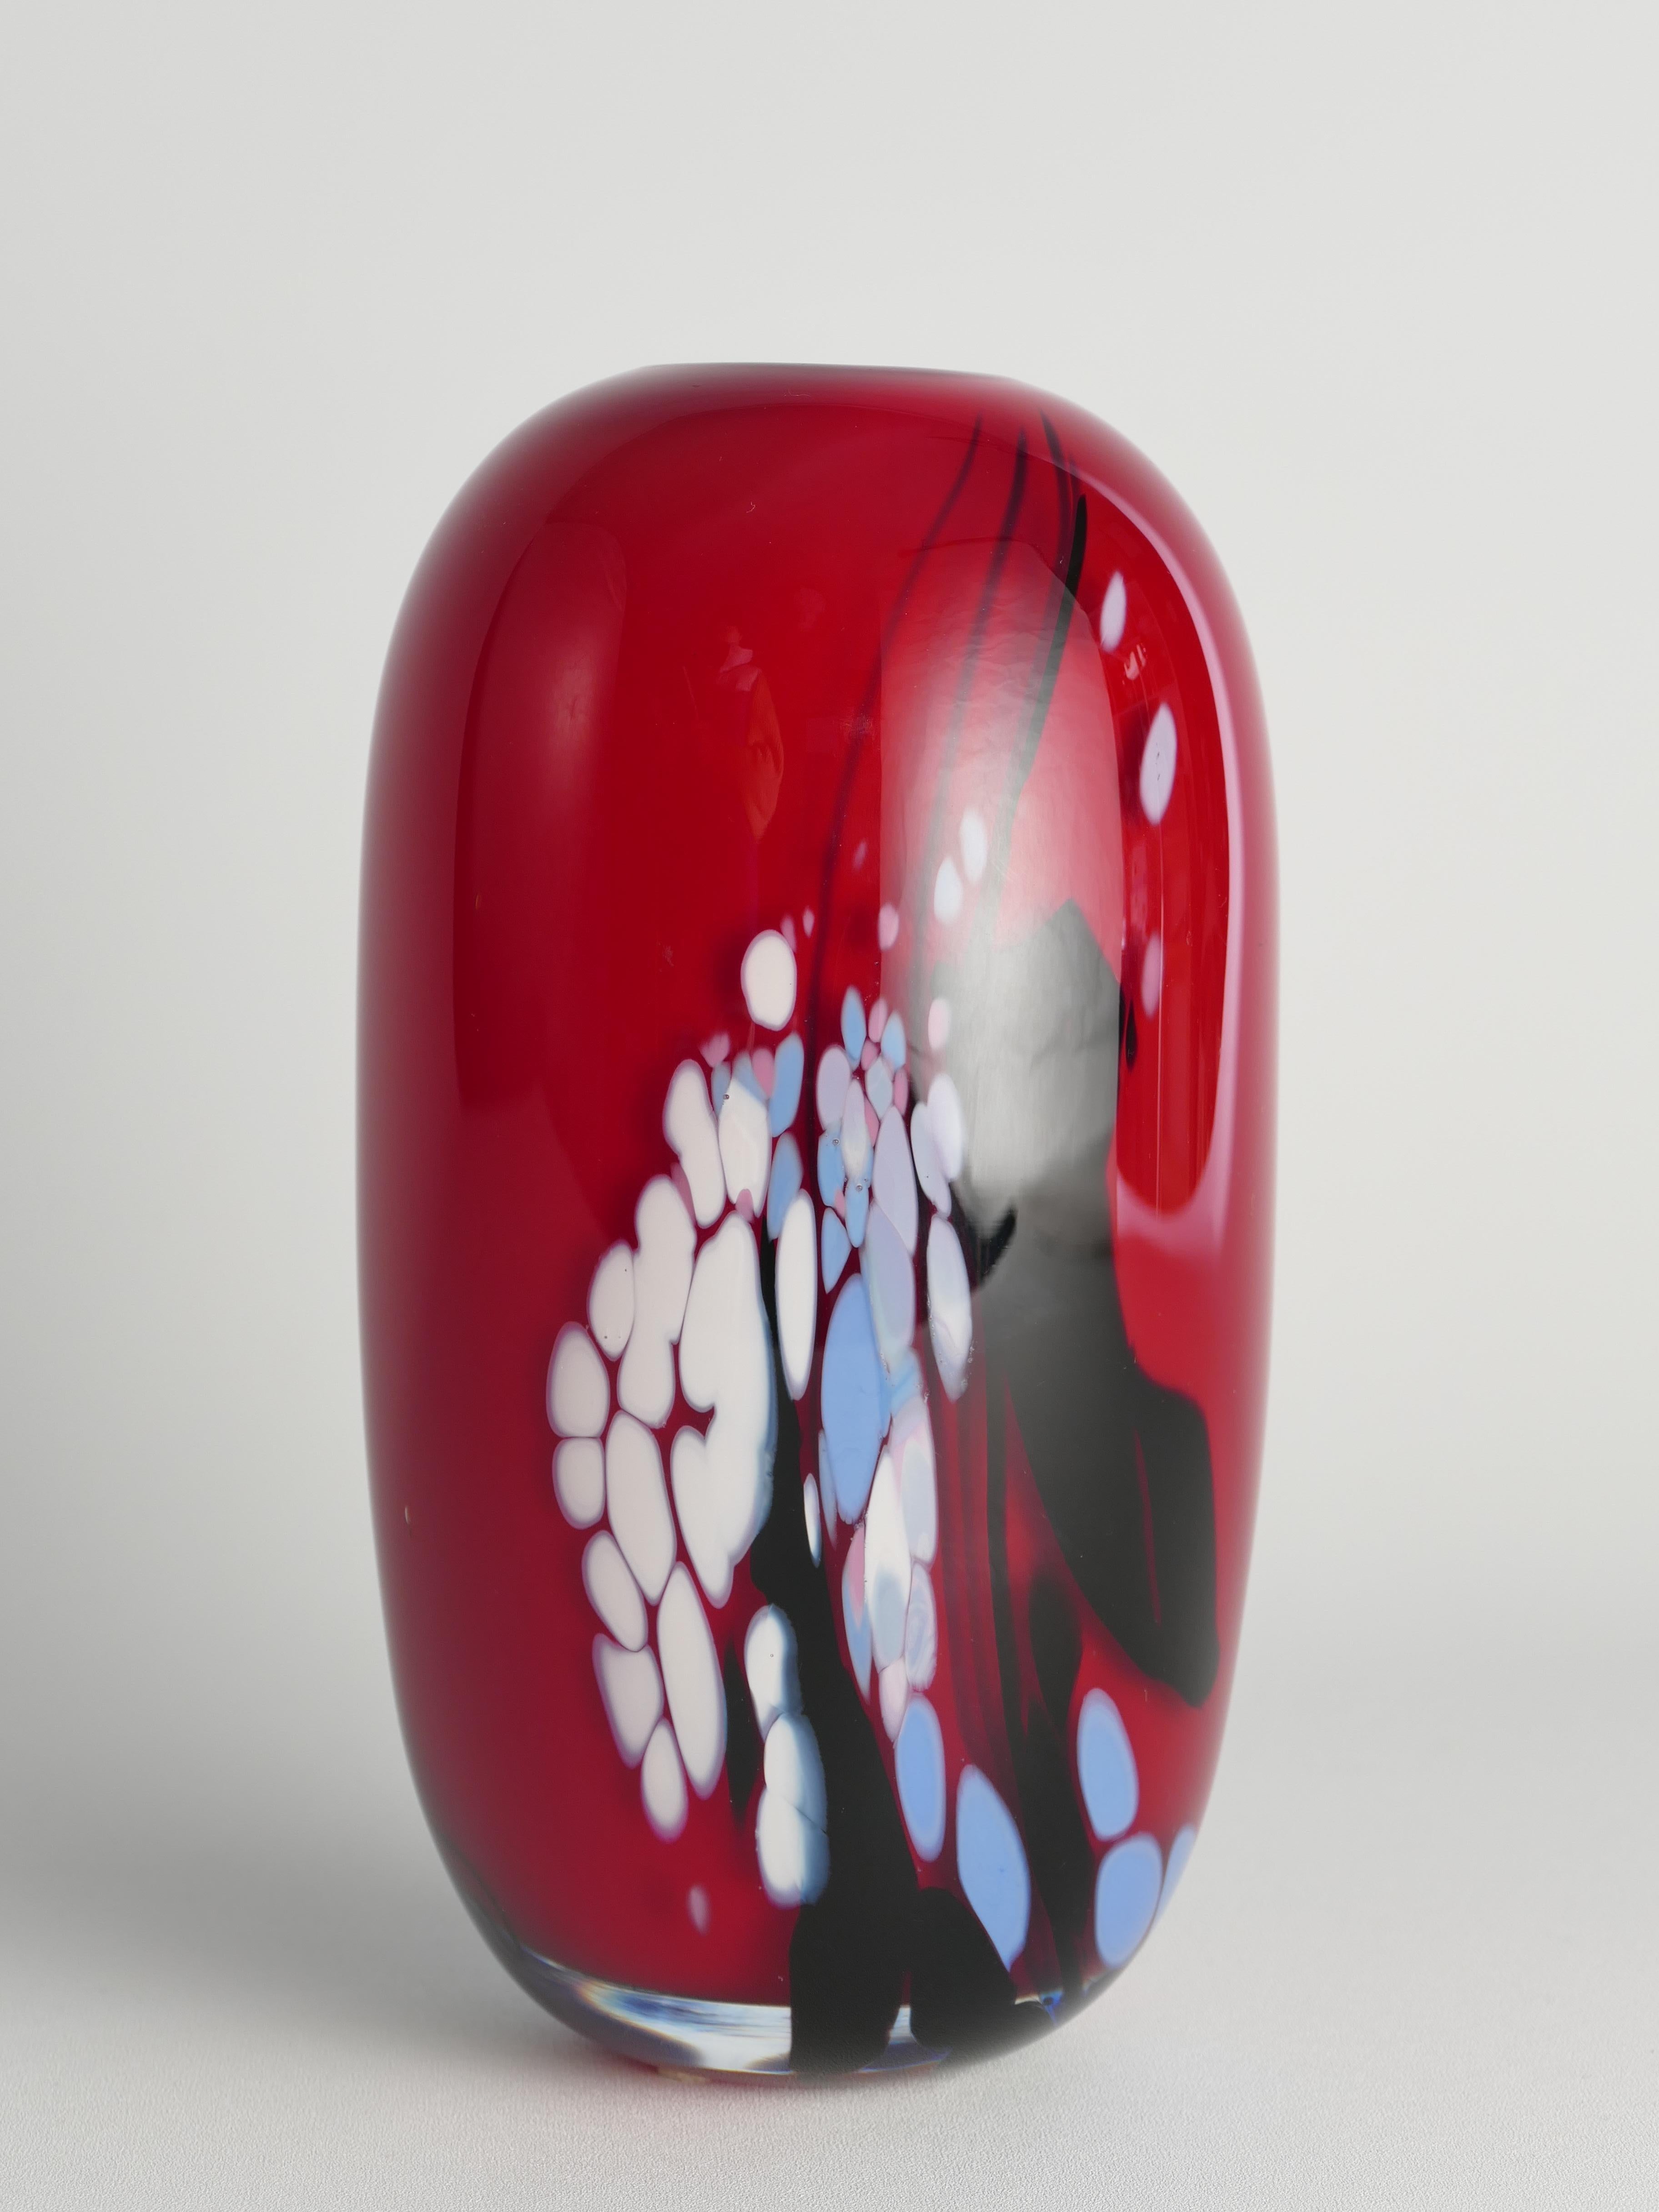 Swedish Unique Cherry Red Art Glass Vase by Mikael Axenbrant, Sweden 1990 For Sale